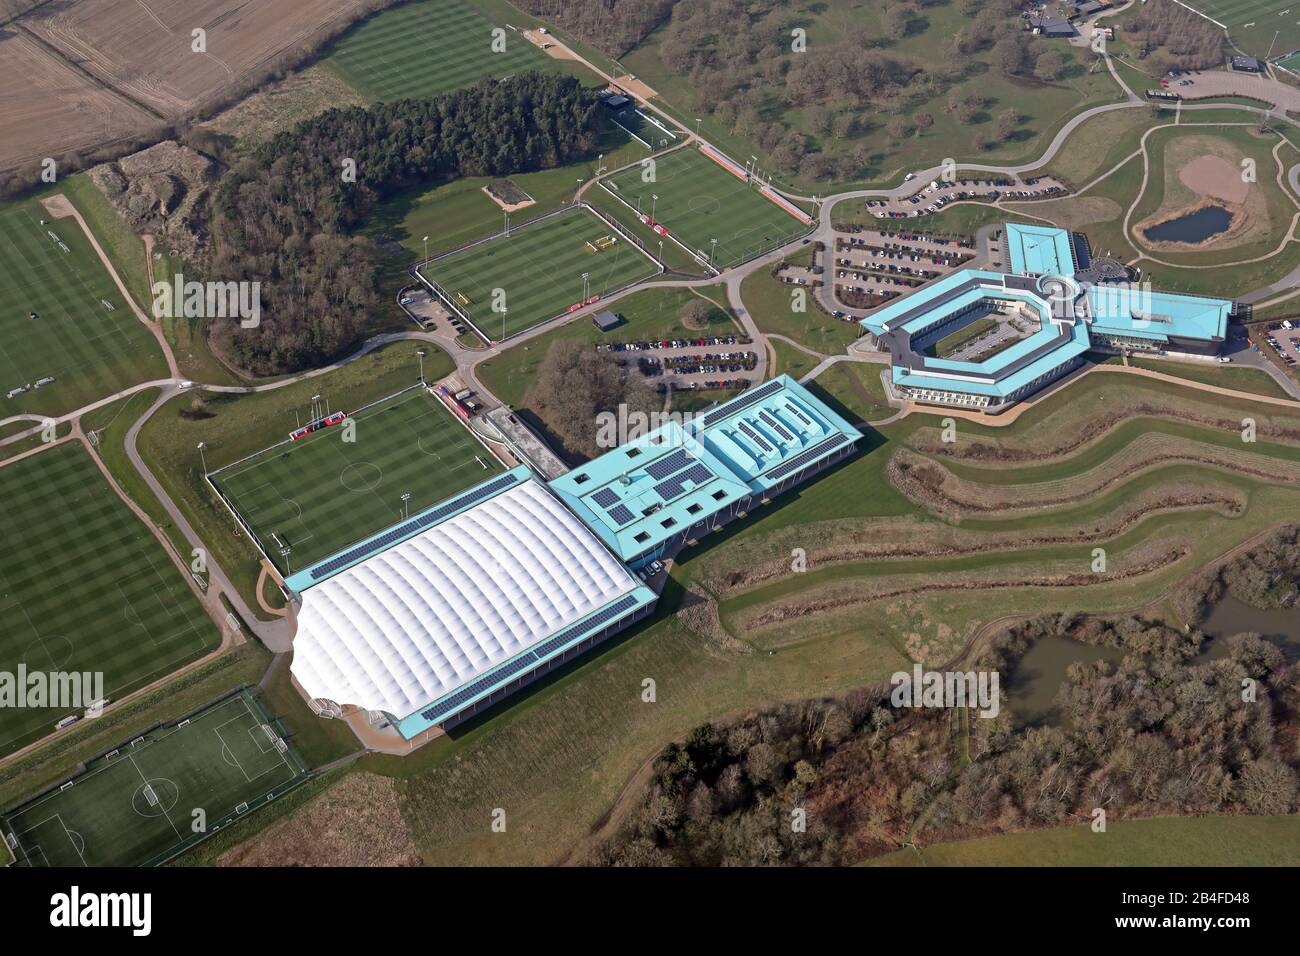 aerial view of St George's Park England Training camp facility at Tatenhill, Derby Stock Photo